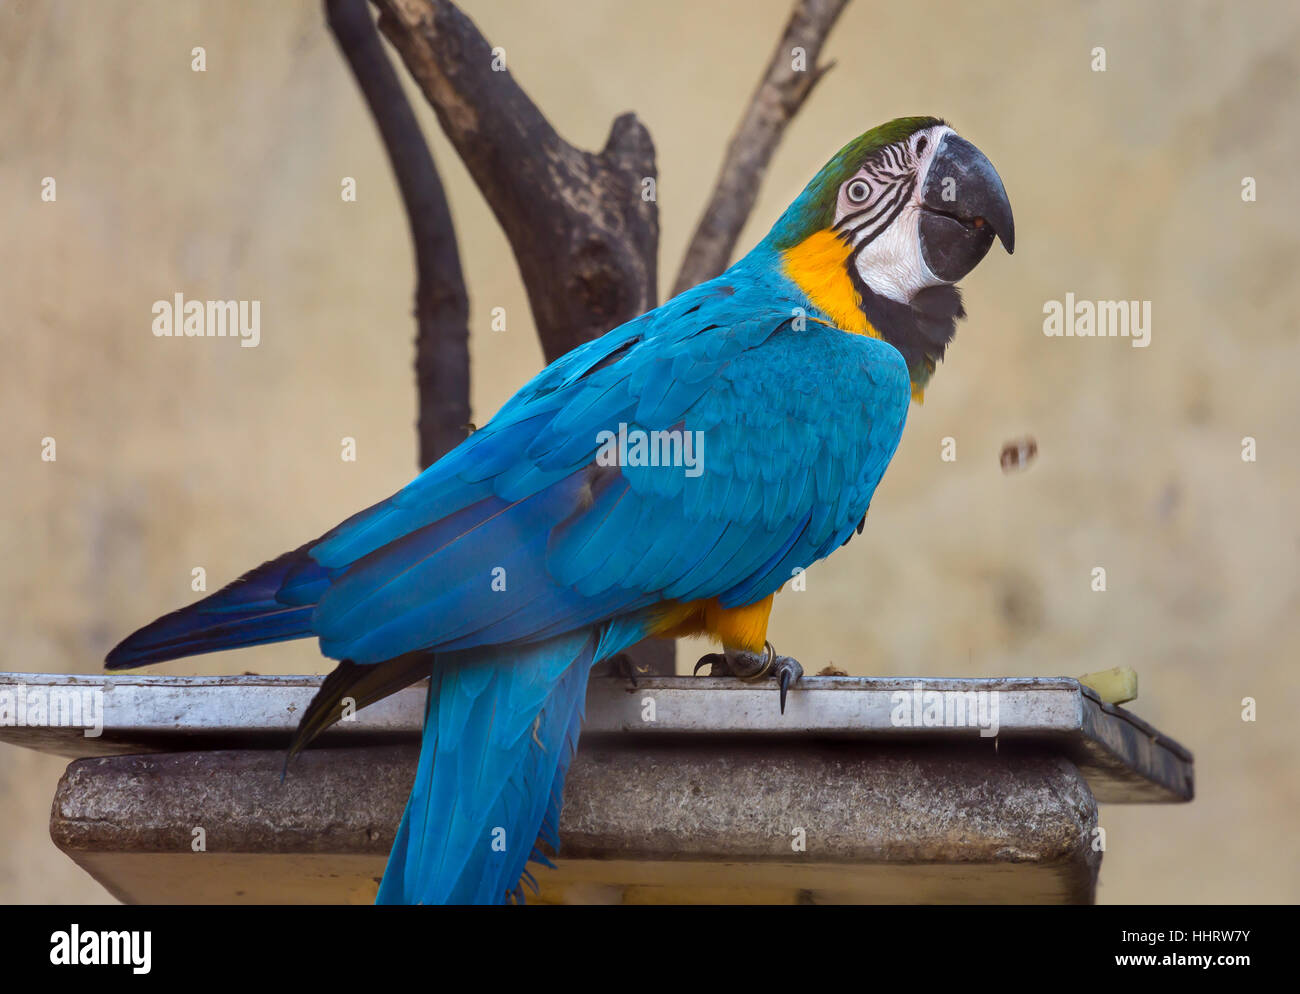 Blue yellow macaw bird in an enclosure at a bird sanctuary in India. Stock Photo